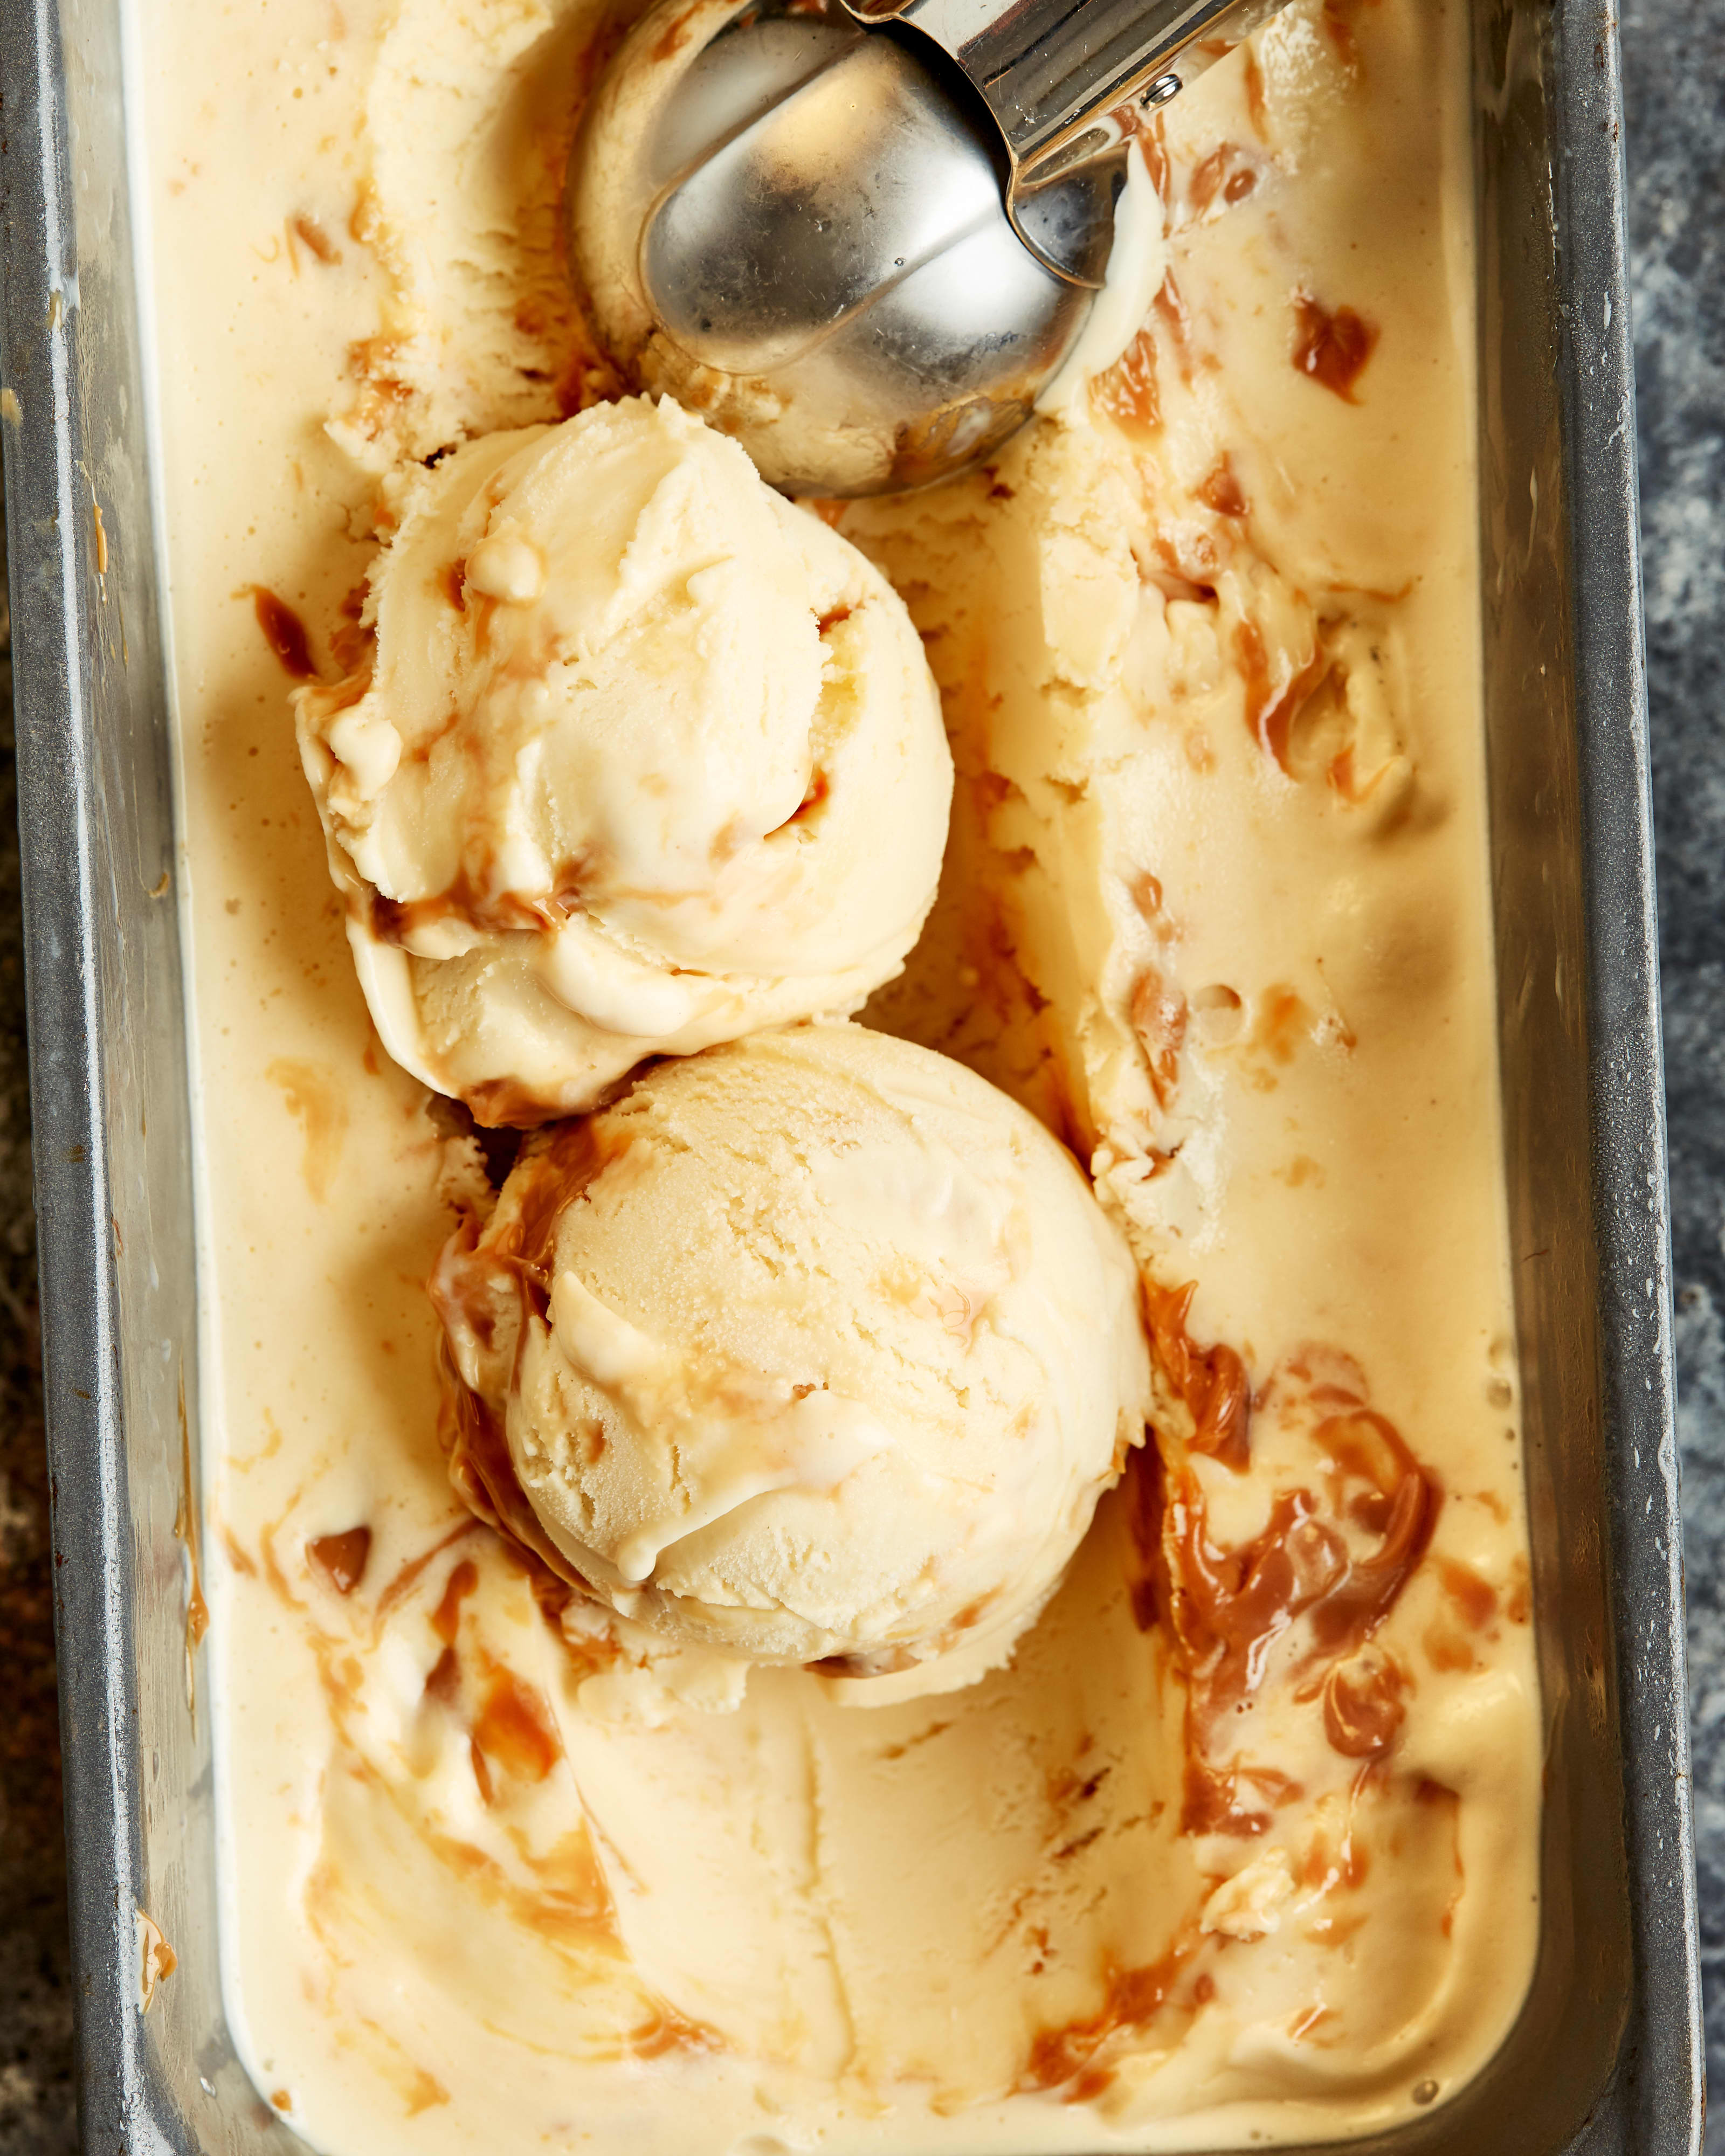 tro aborre under How Long Does Ice Cream Last and Can Ice Cream Go Bad? | Kitchn